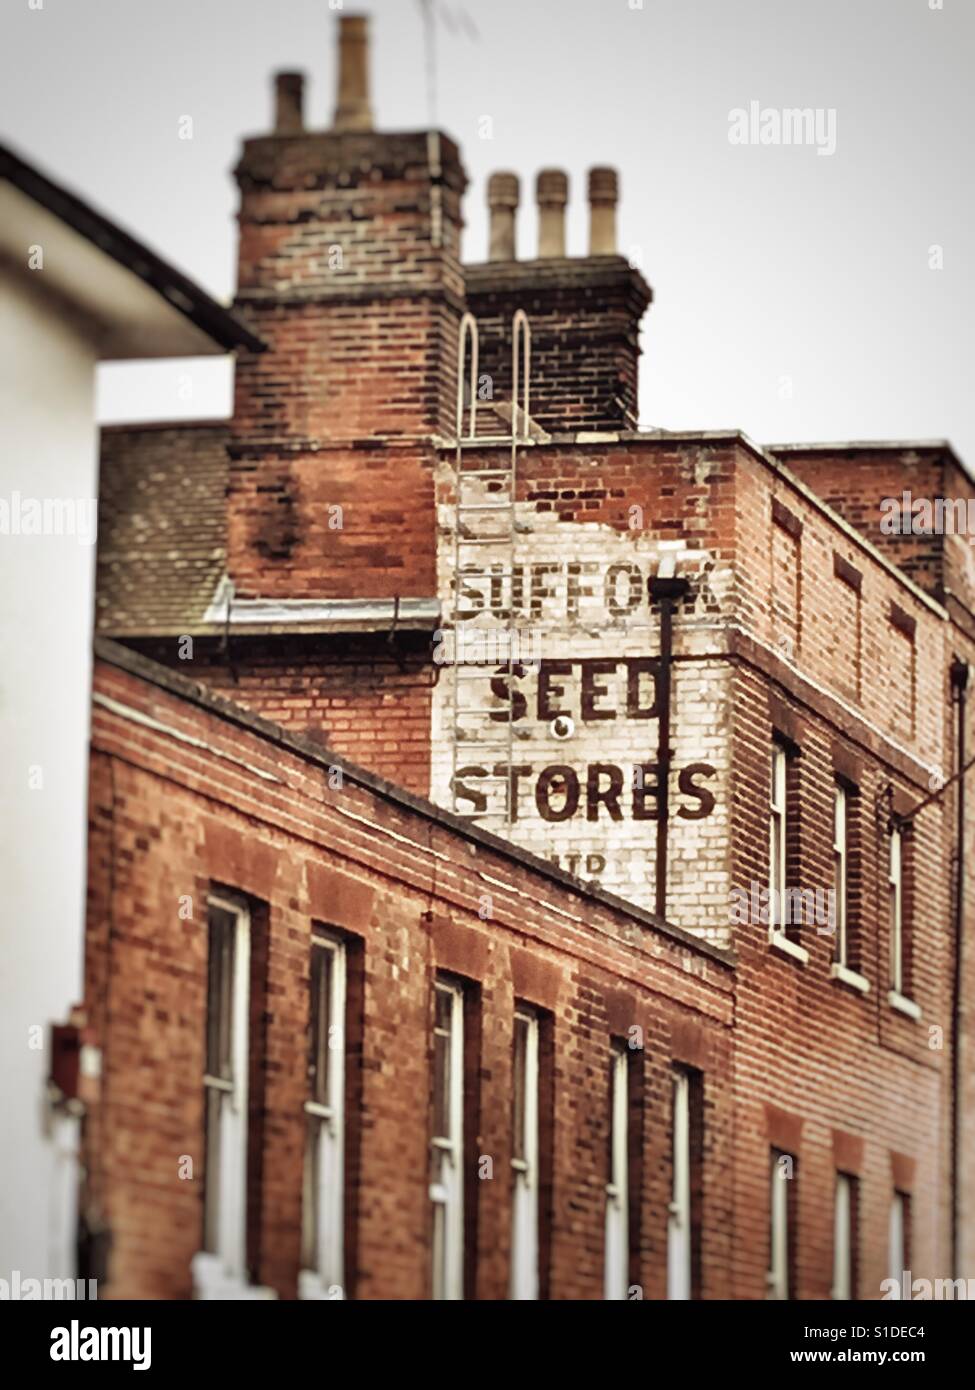 Suffolk Seed Stores Ltd Stock Photo